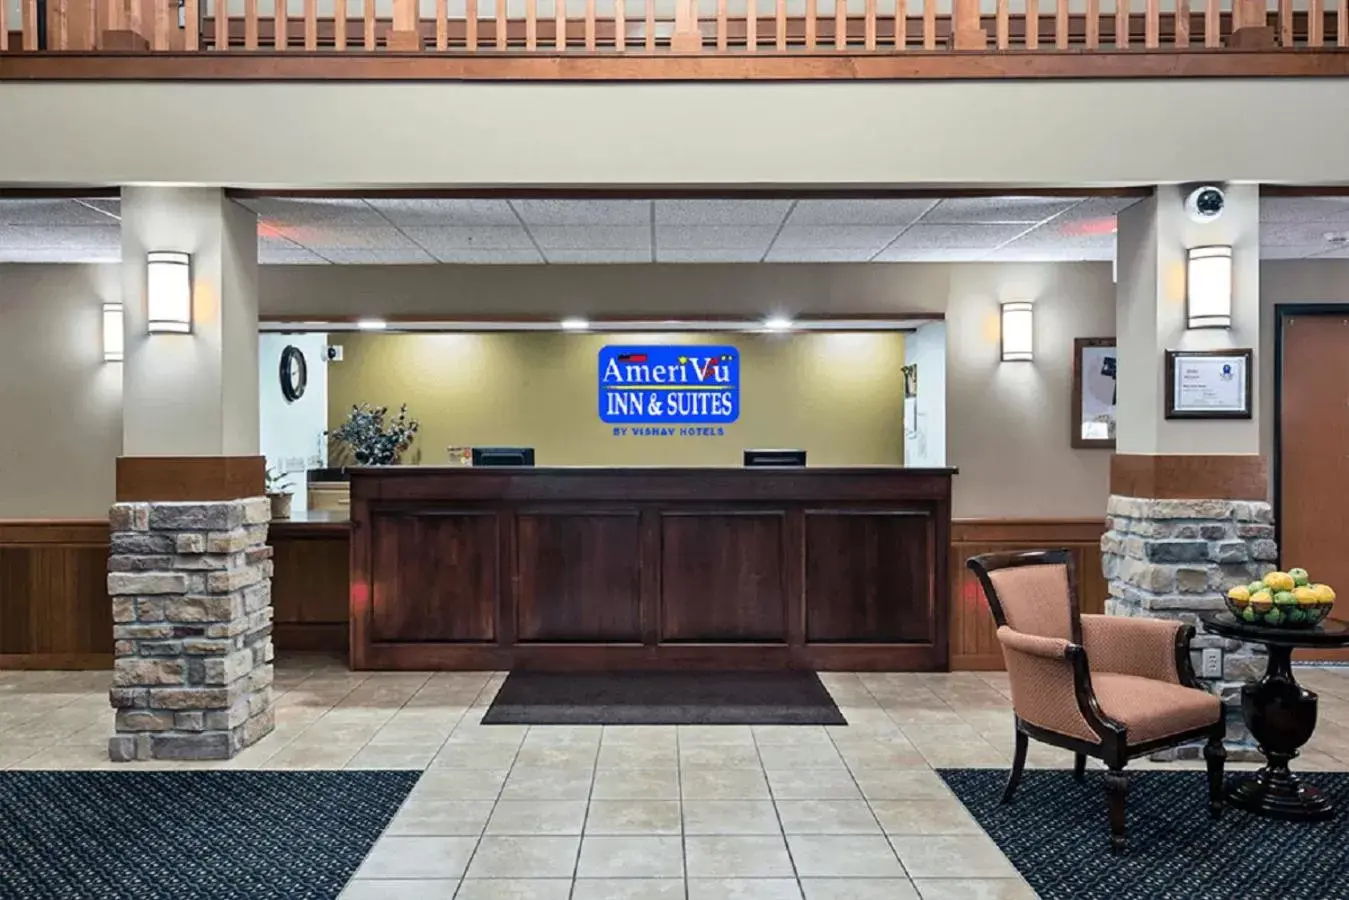 Lobby/Reception in AmeriVu Inn and Suites - Waconia